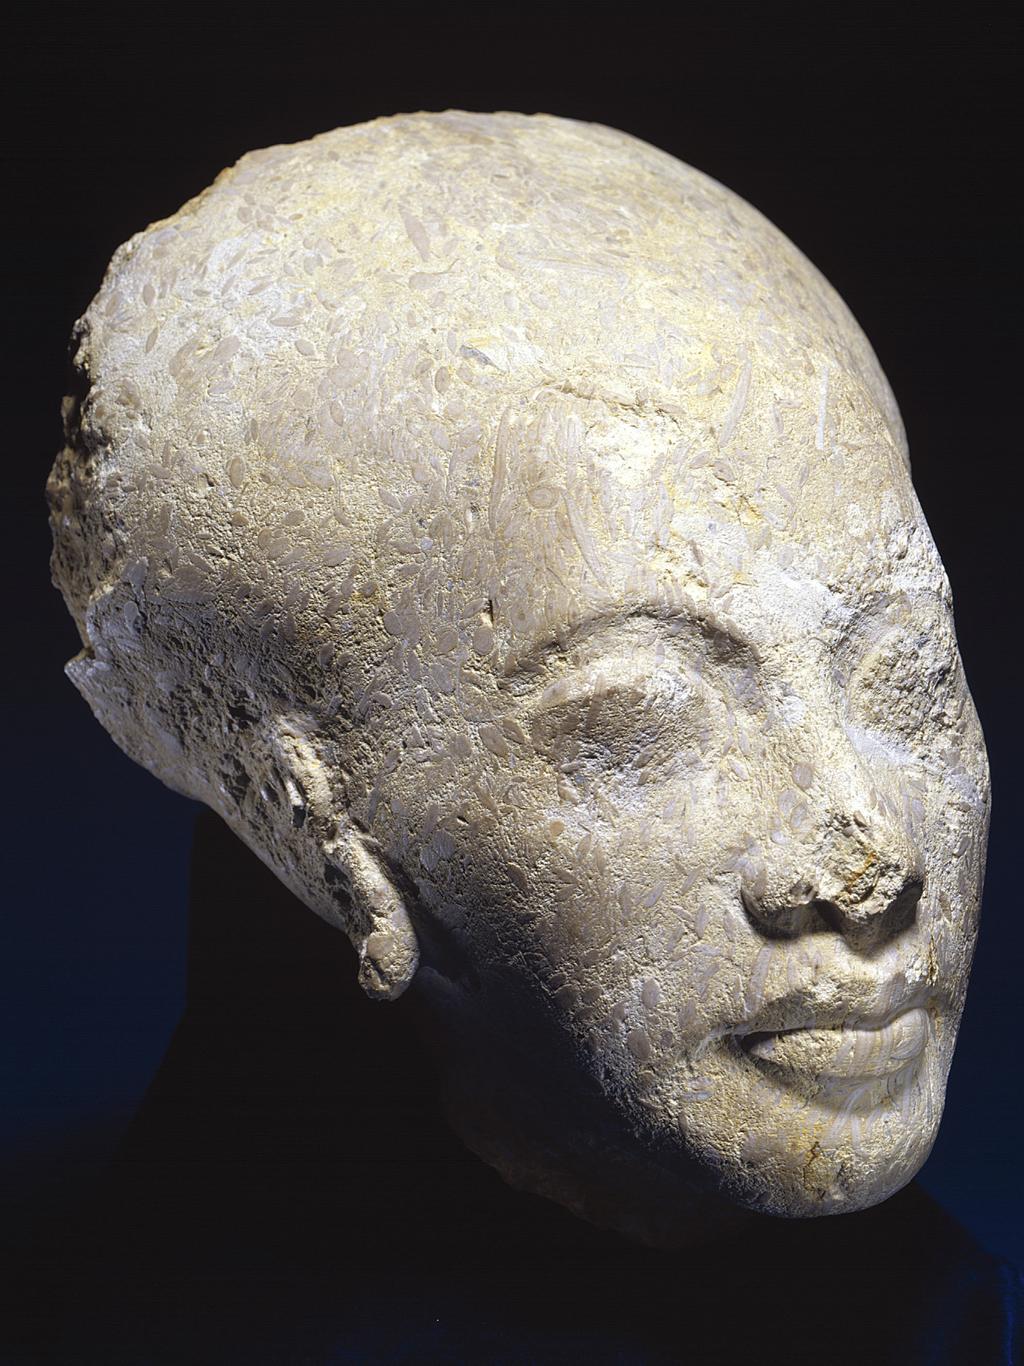 An image of Figure. Statue/stelae. Representing the head of the principle royal wife, Nefertiti, or a princess. Production Place/Find Spot: Egypt. Carved sandstone or limestone, length 29 cm, width 17 cm, circa 1352 B.C. to circa 1336 B.C. Eighteenth Dynasty, New Kingdom.